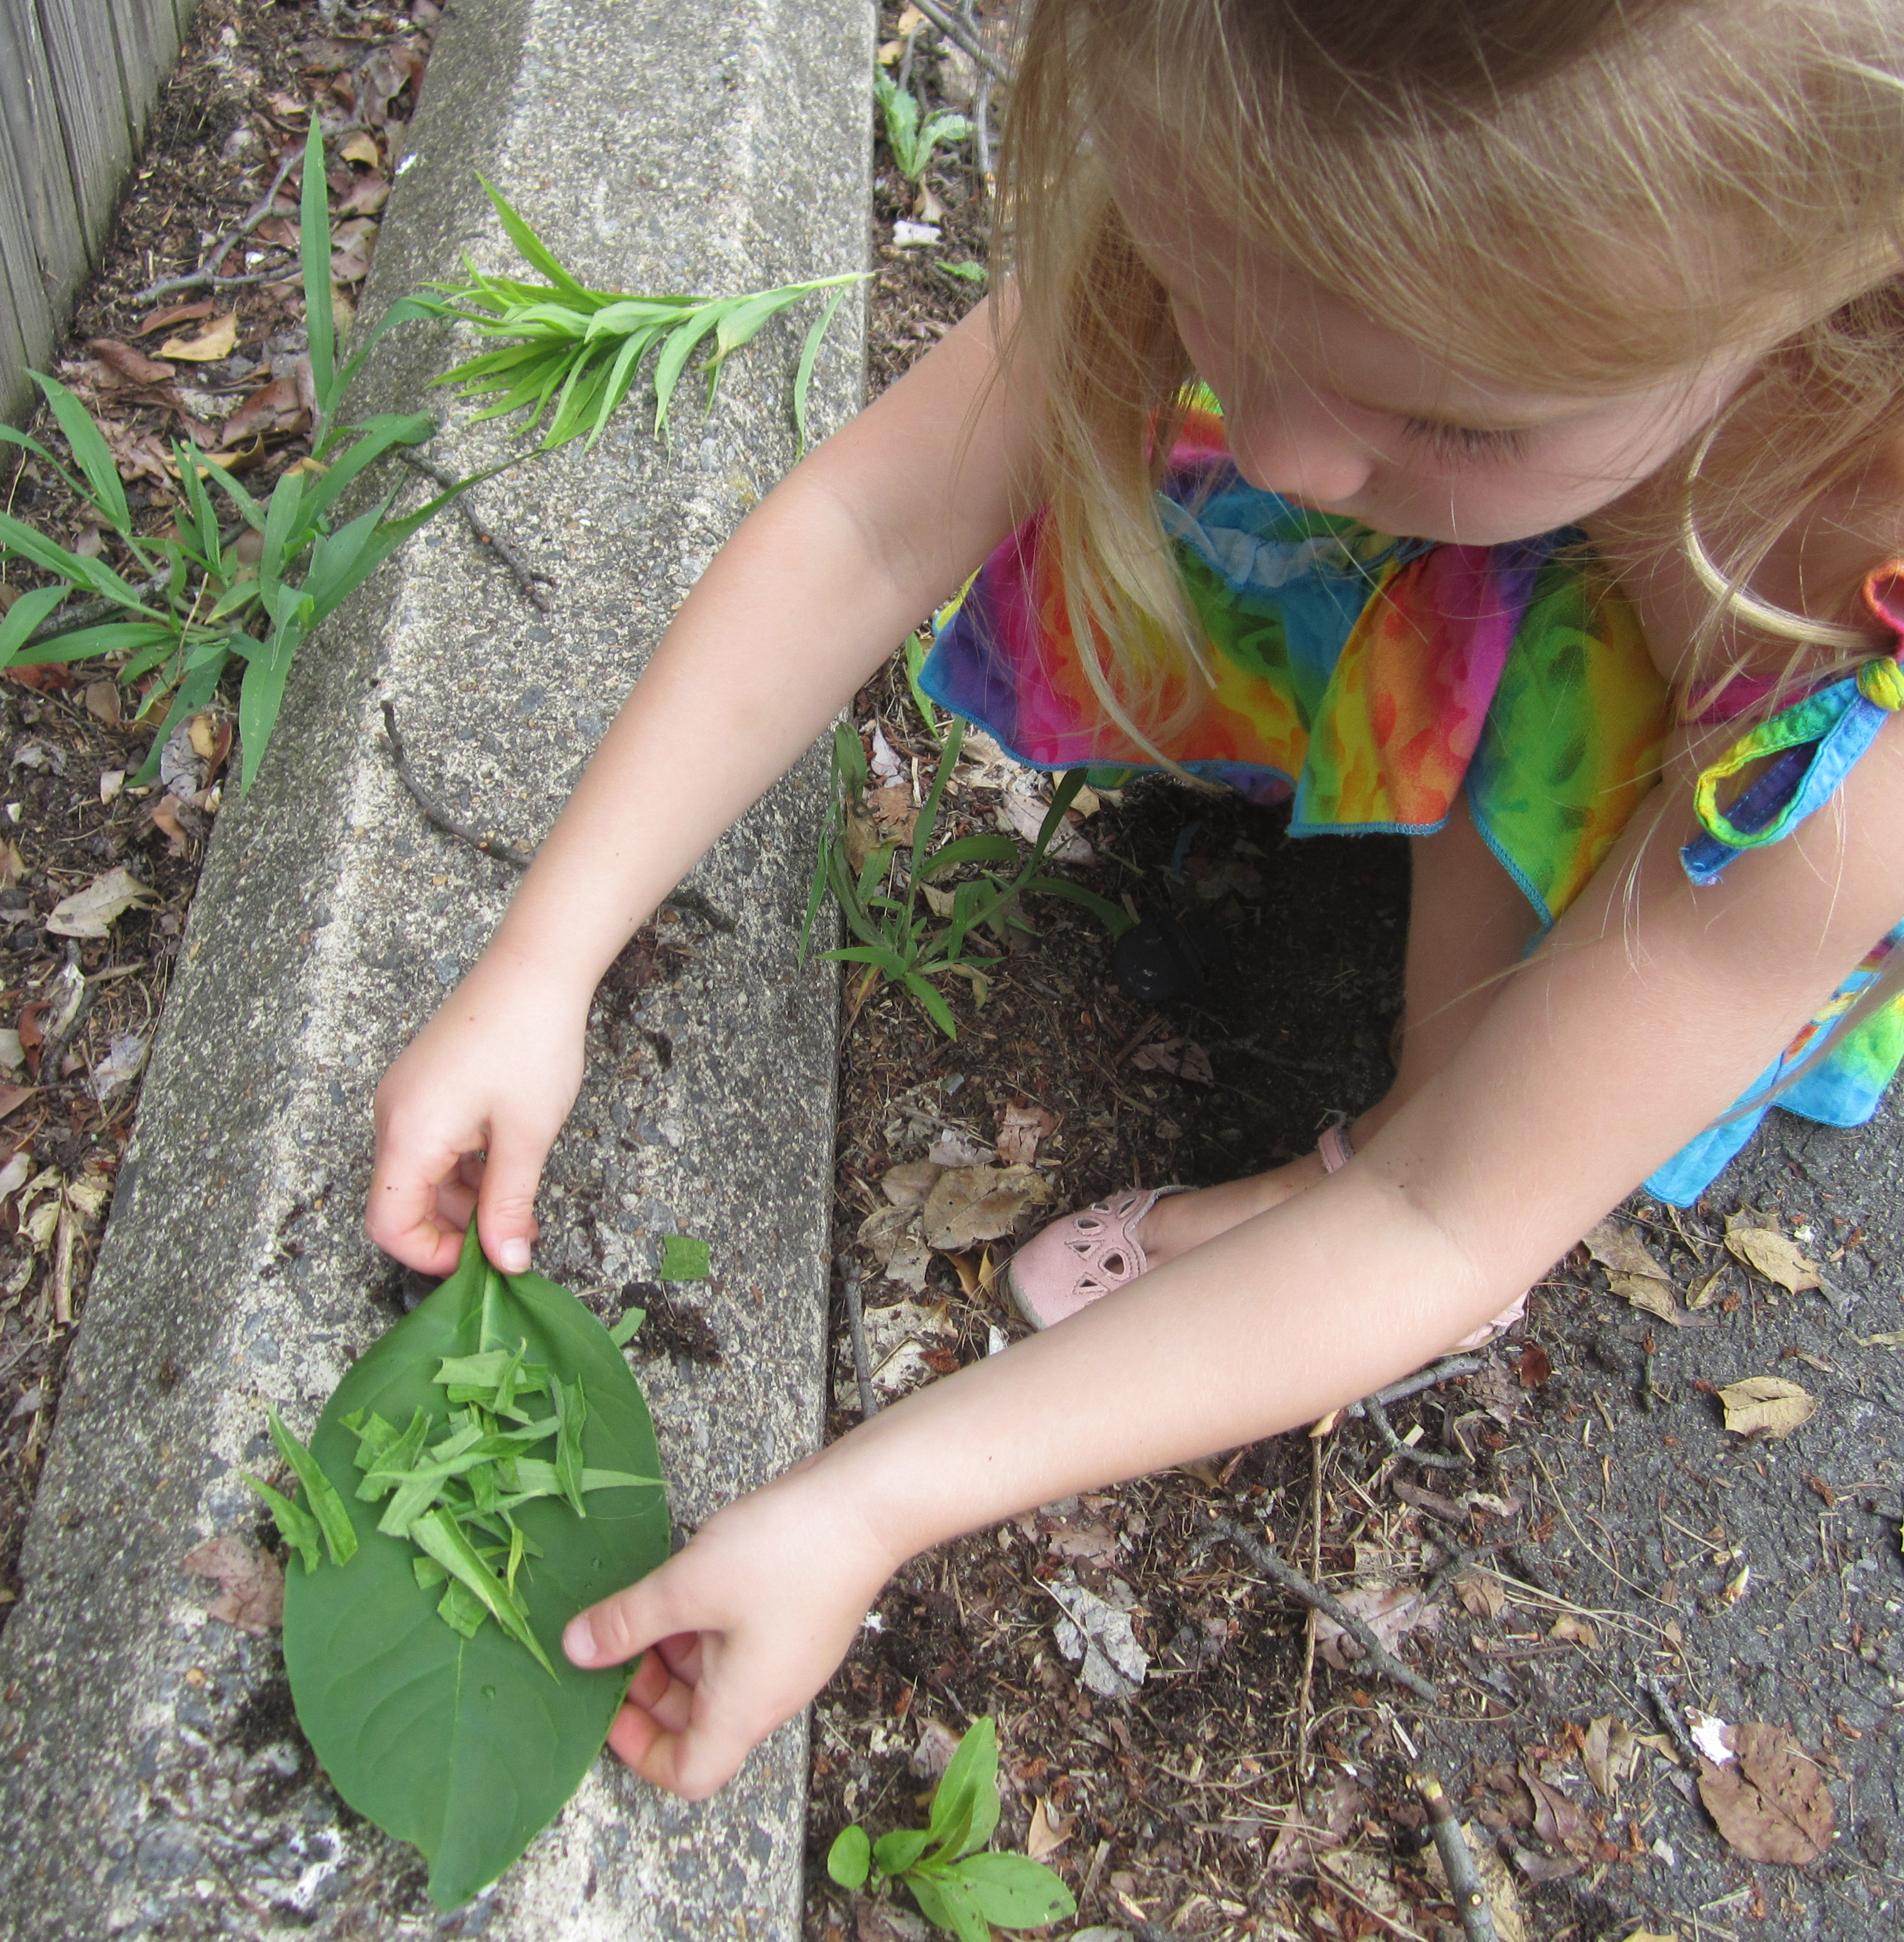 Child making a pretend plate of food using leaves.